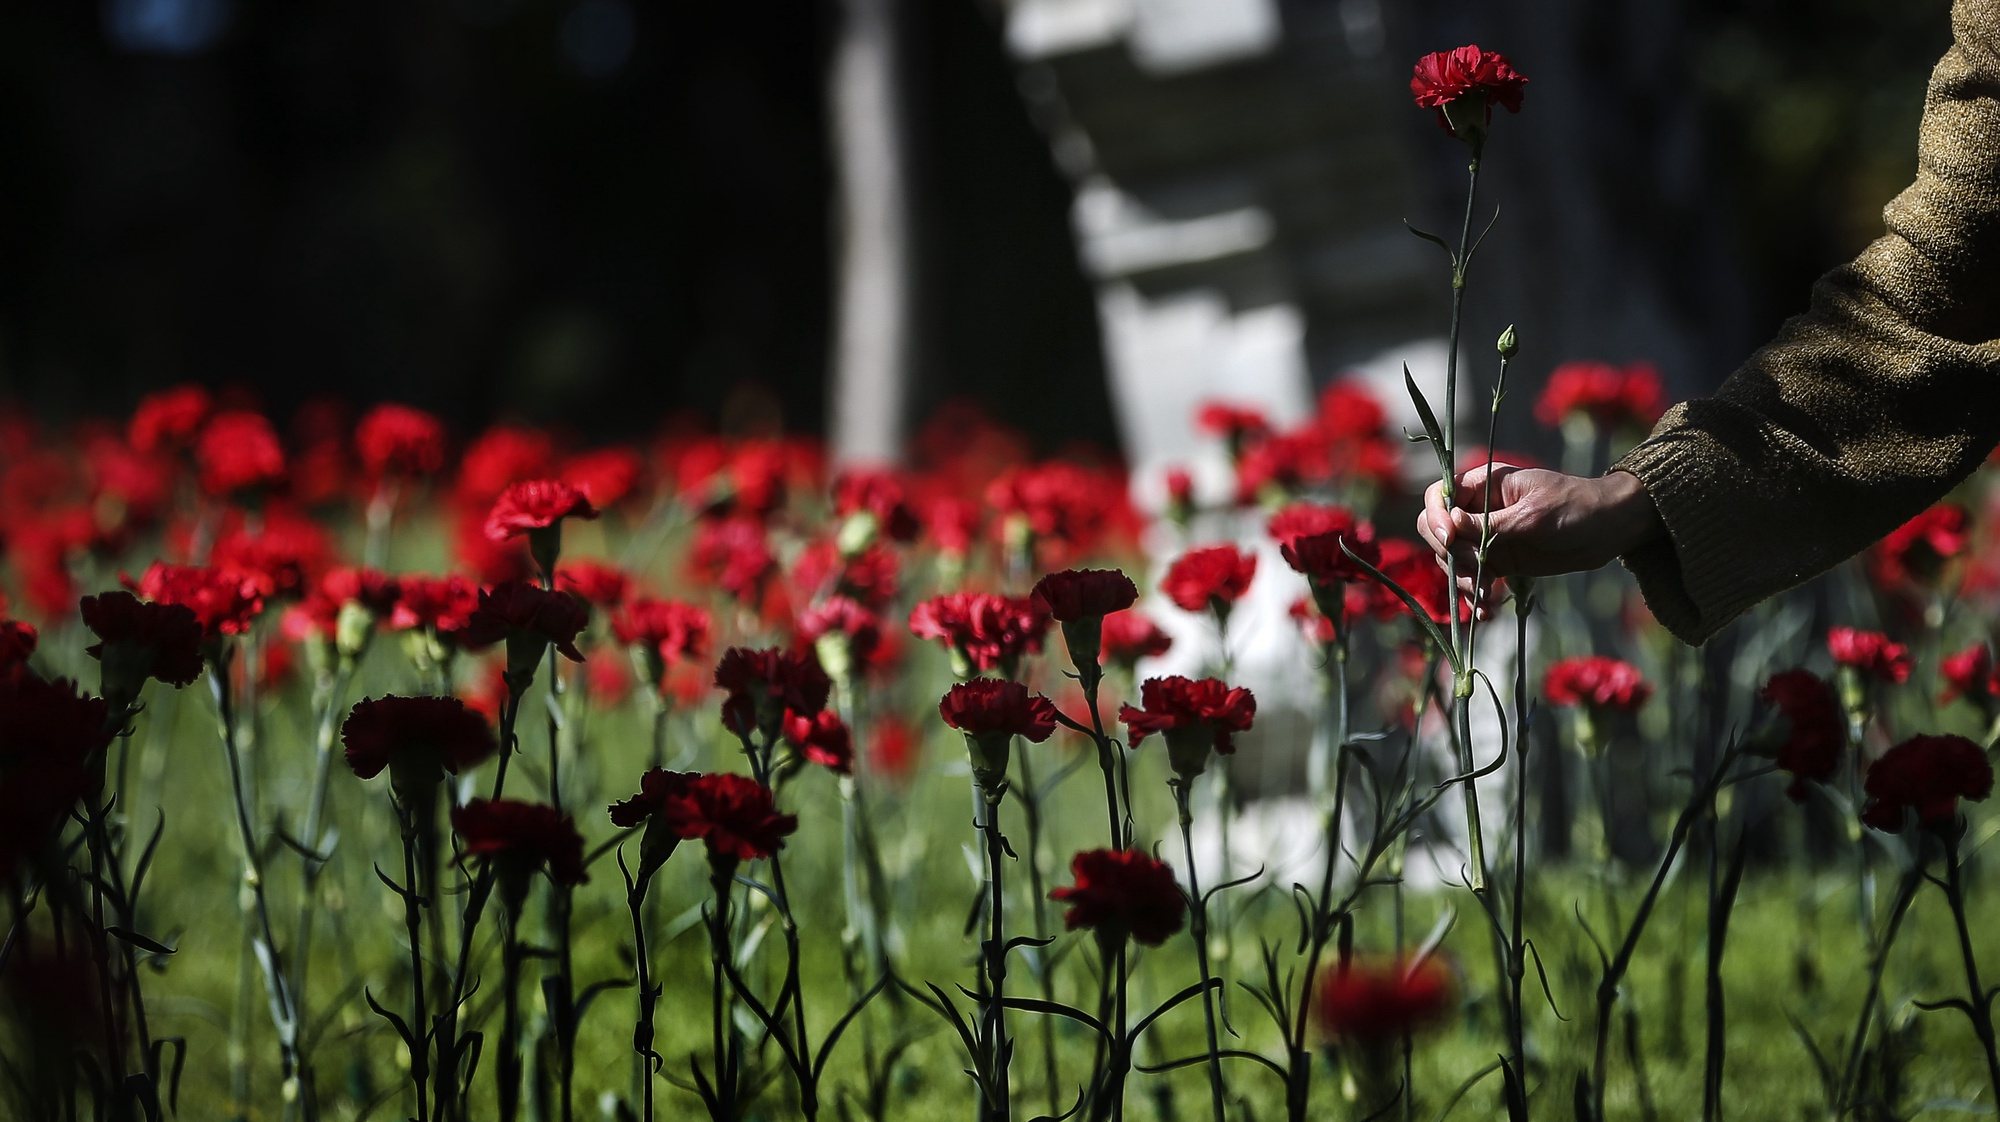 A citizen in the gardens of the oficial residence of Portuguese Prime Minister, takes out a carnation during the celebration of  the 48th anniversary of the 25 April Revolution, in Lisbon, Portugal, 25 April 2022. The 25 April Revolution, also known as the Carnation Revolution, was initialized on 25 April 1974 by a coup of a group of officers opposing the then ruling junta, and was soon supported by the civilian population to overthrow the regime in a nearly bloodless move. RODRIGO ANTUNES/LUSA